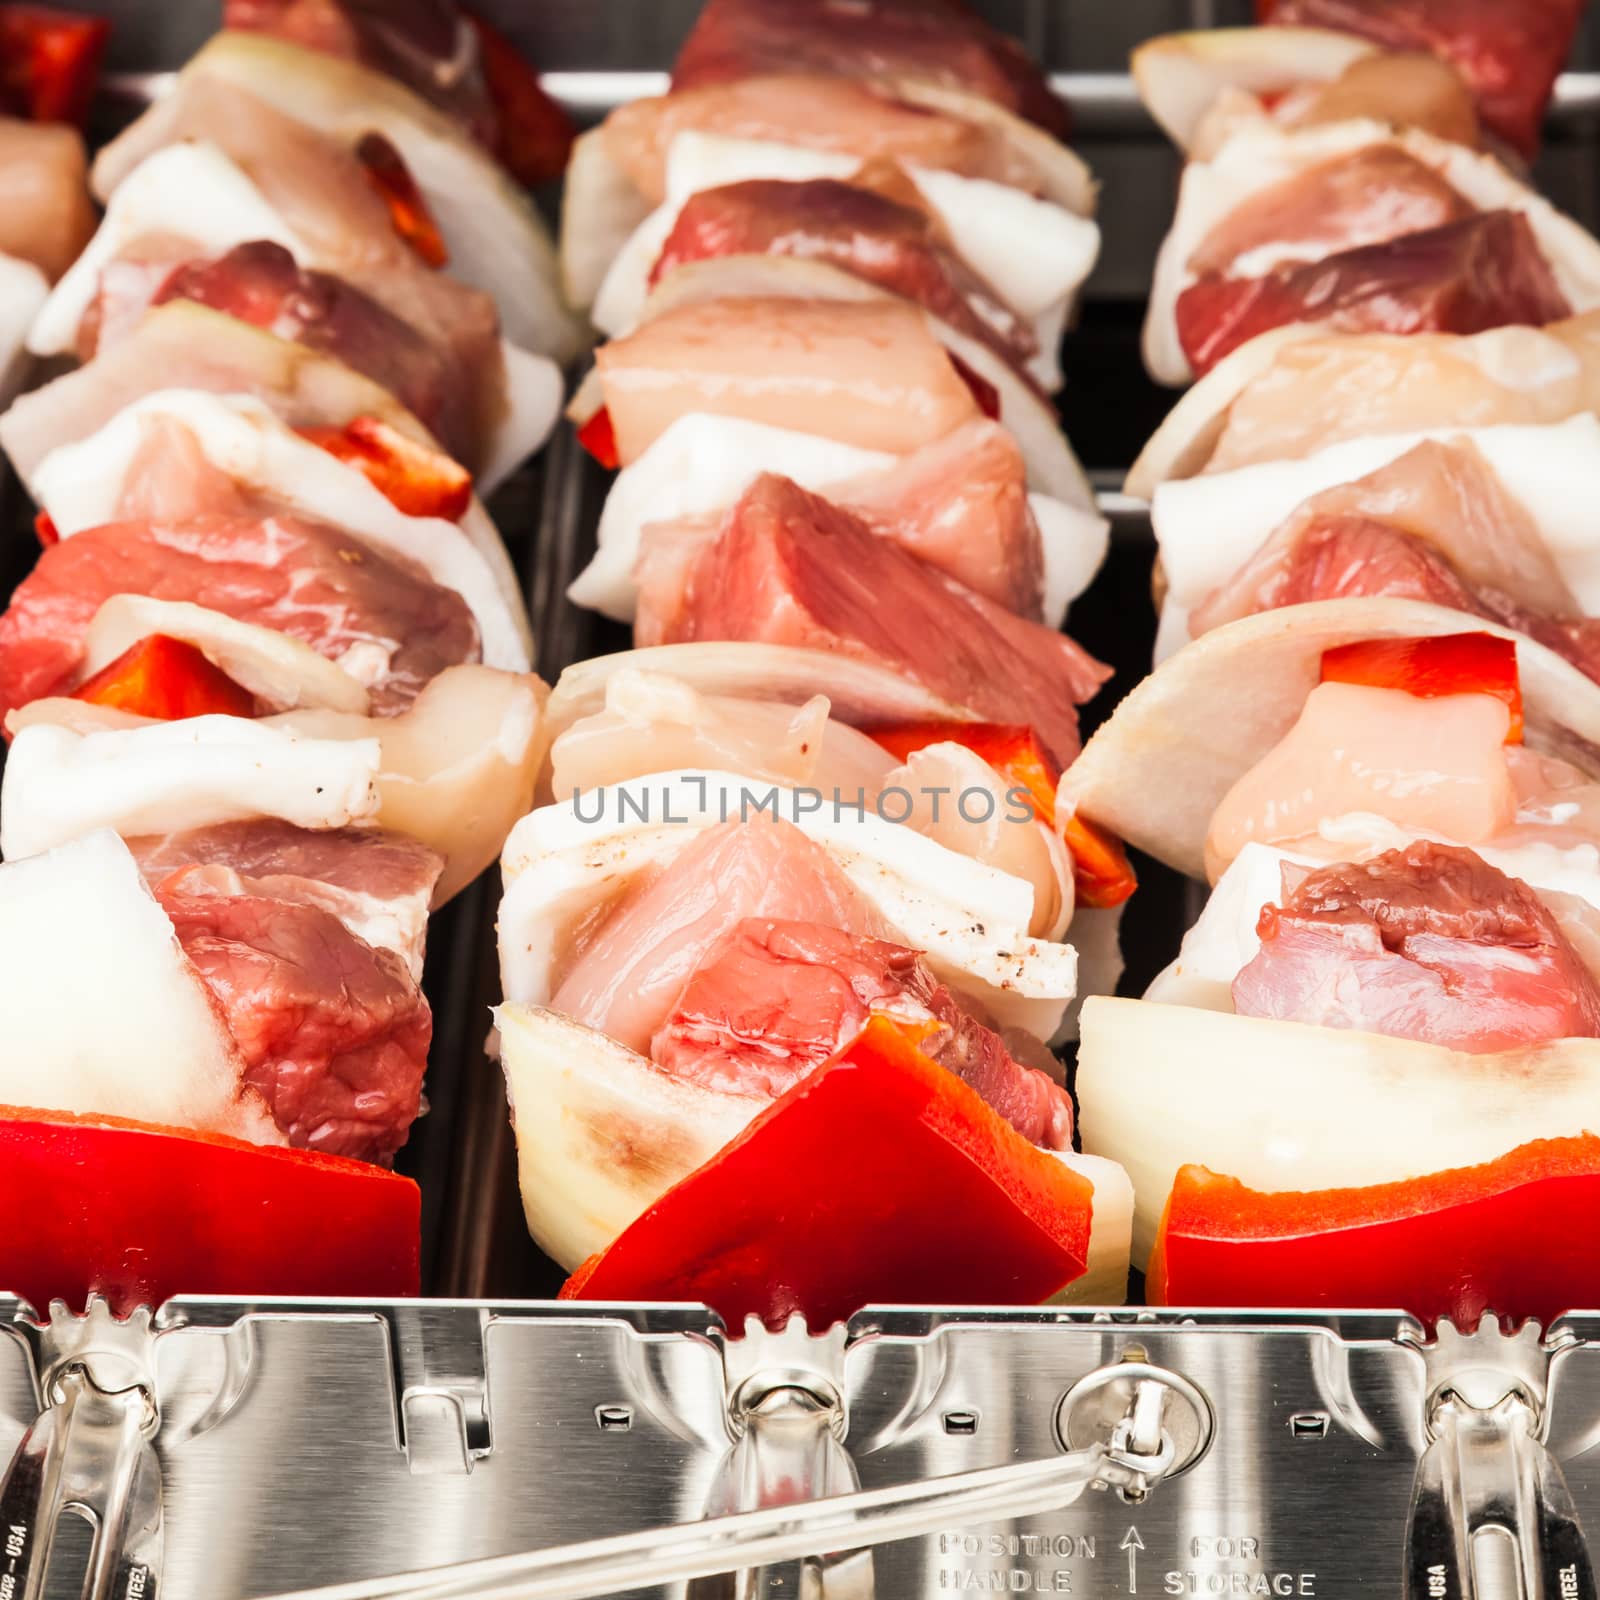 Detail of meat preparation for a barbecue